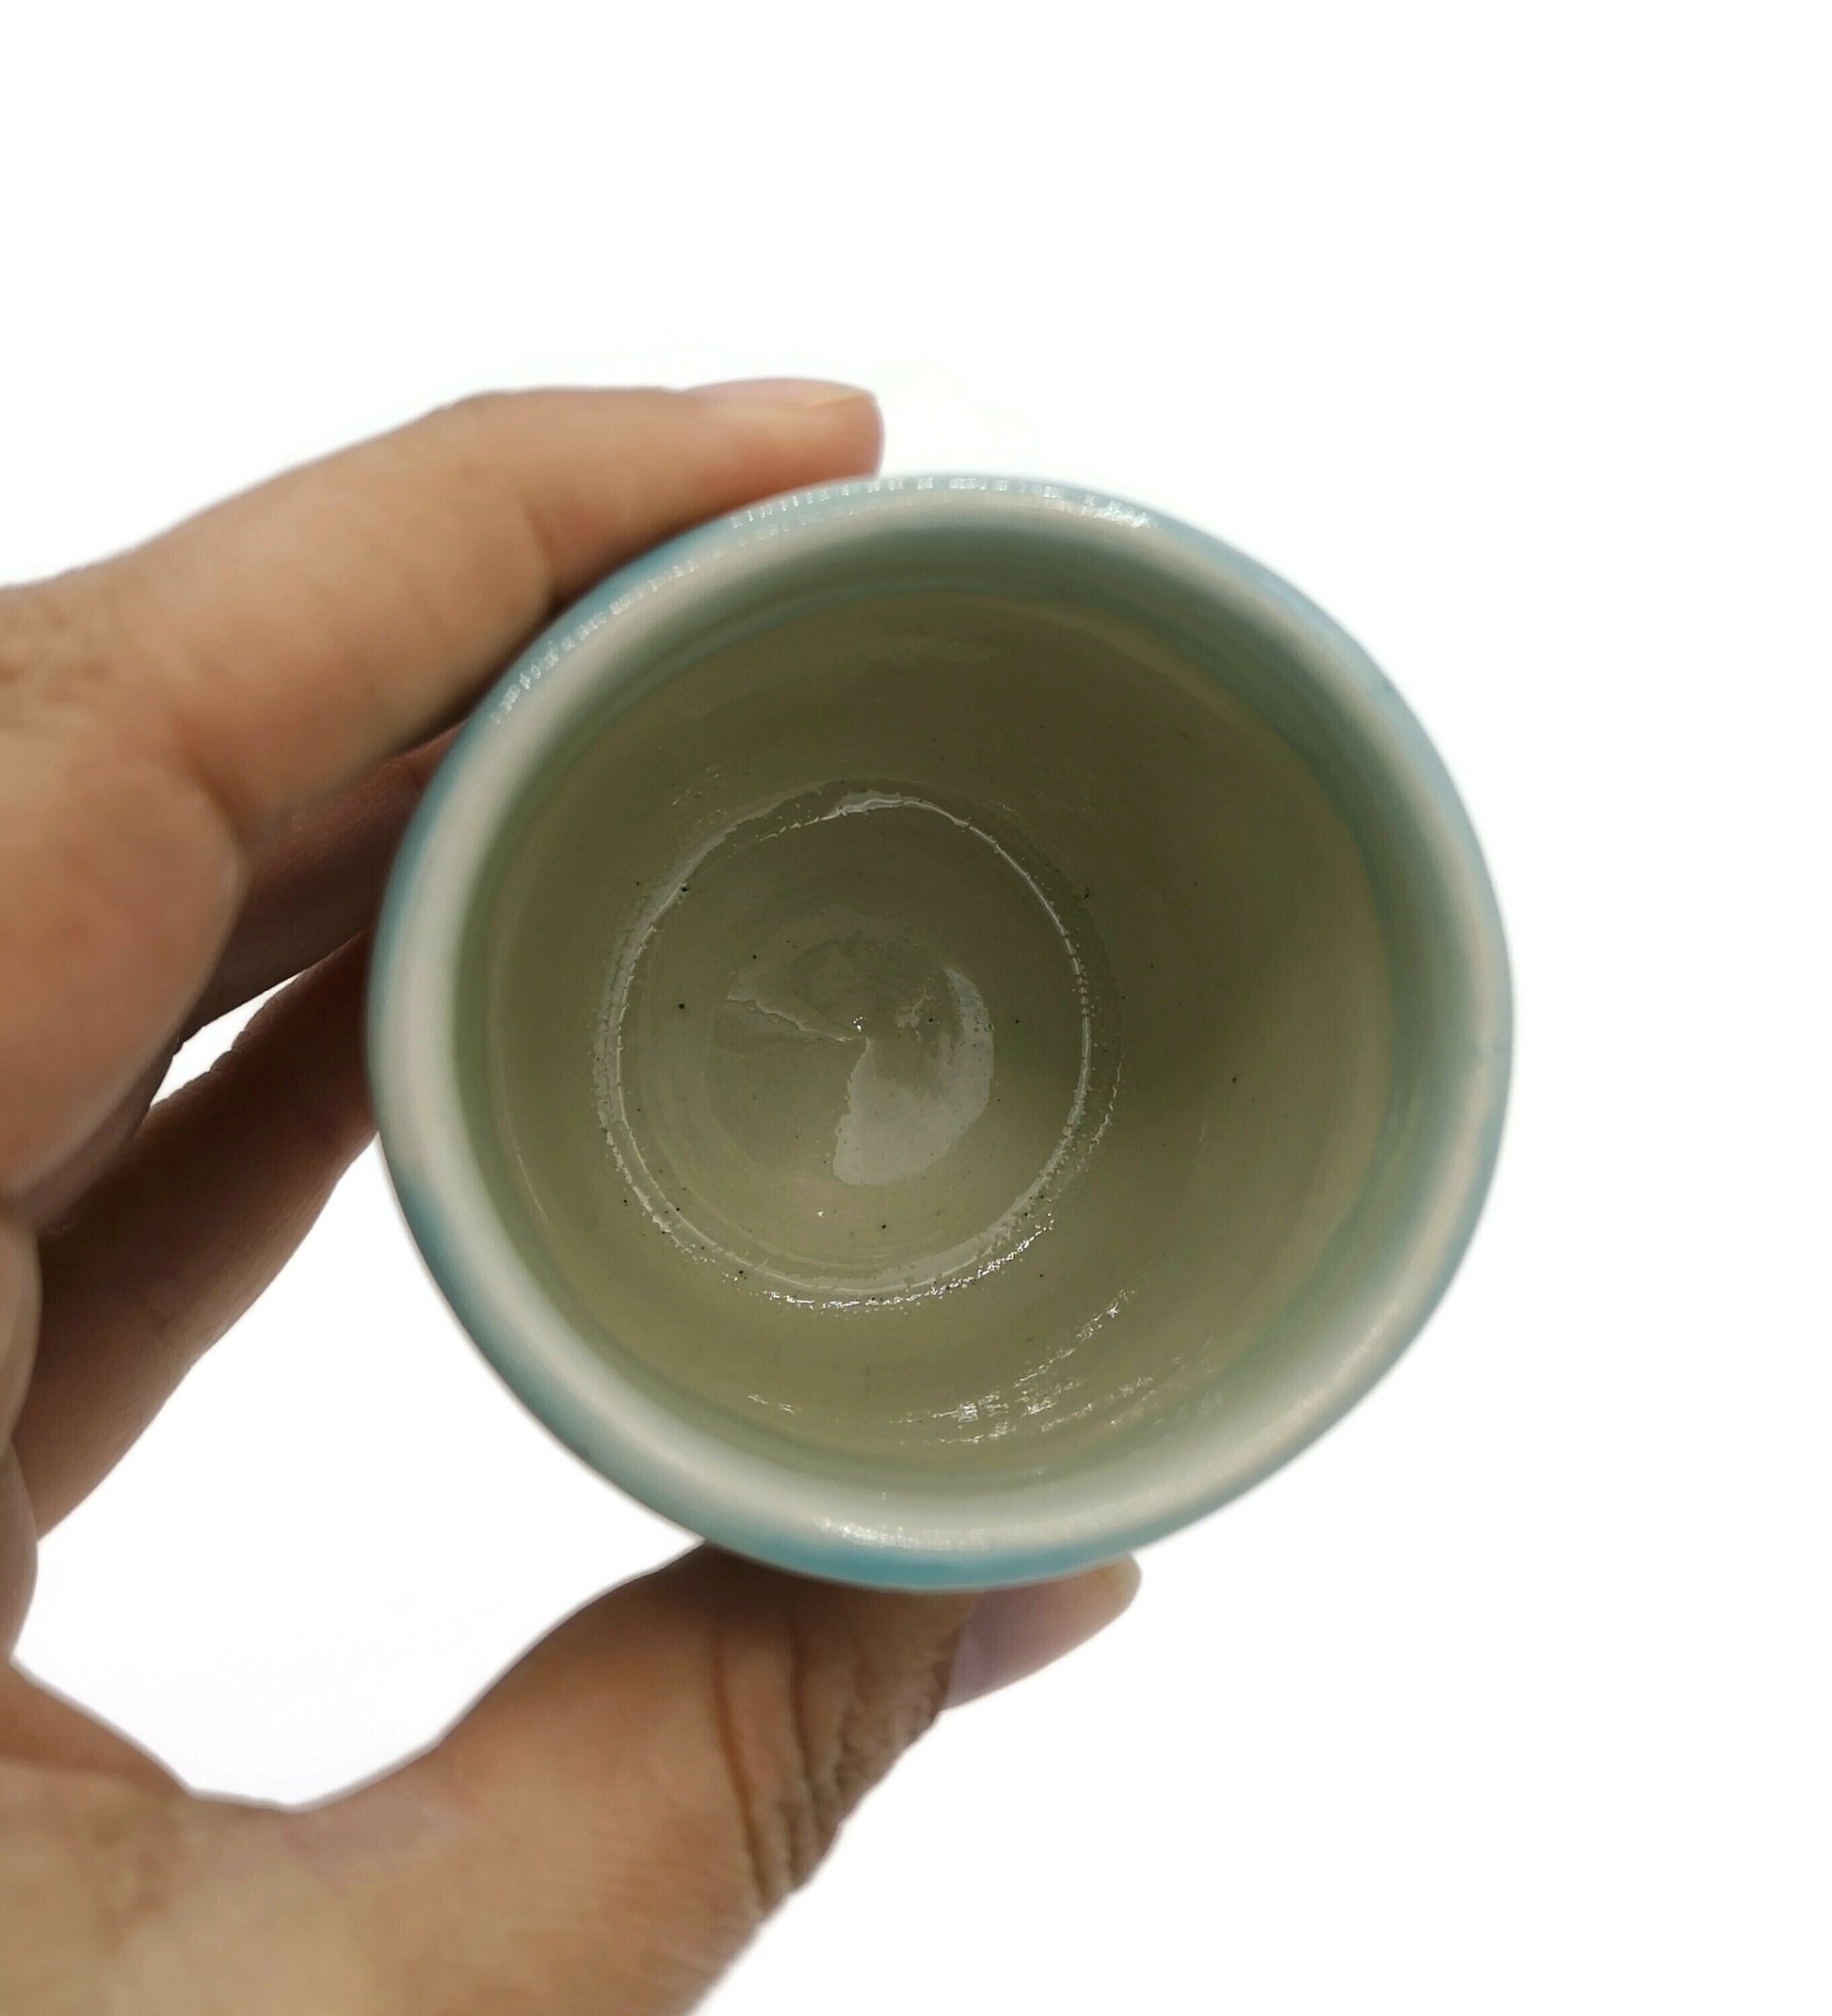 Handmade Ceramic Espresso Cup, Turquoise Blue Stoneware Mug Without Handle, Dishwasher Safe Coffee Cup And Saucer, Unique Best Gifts For Him - Ceramica Ana Rafael